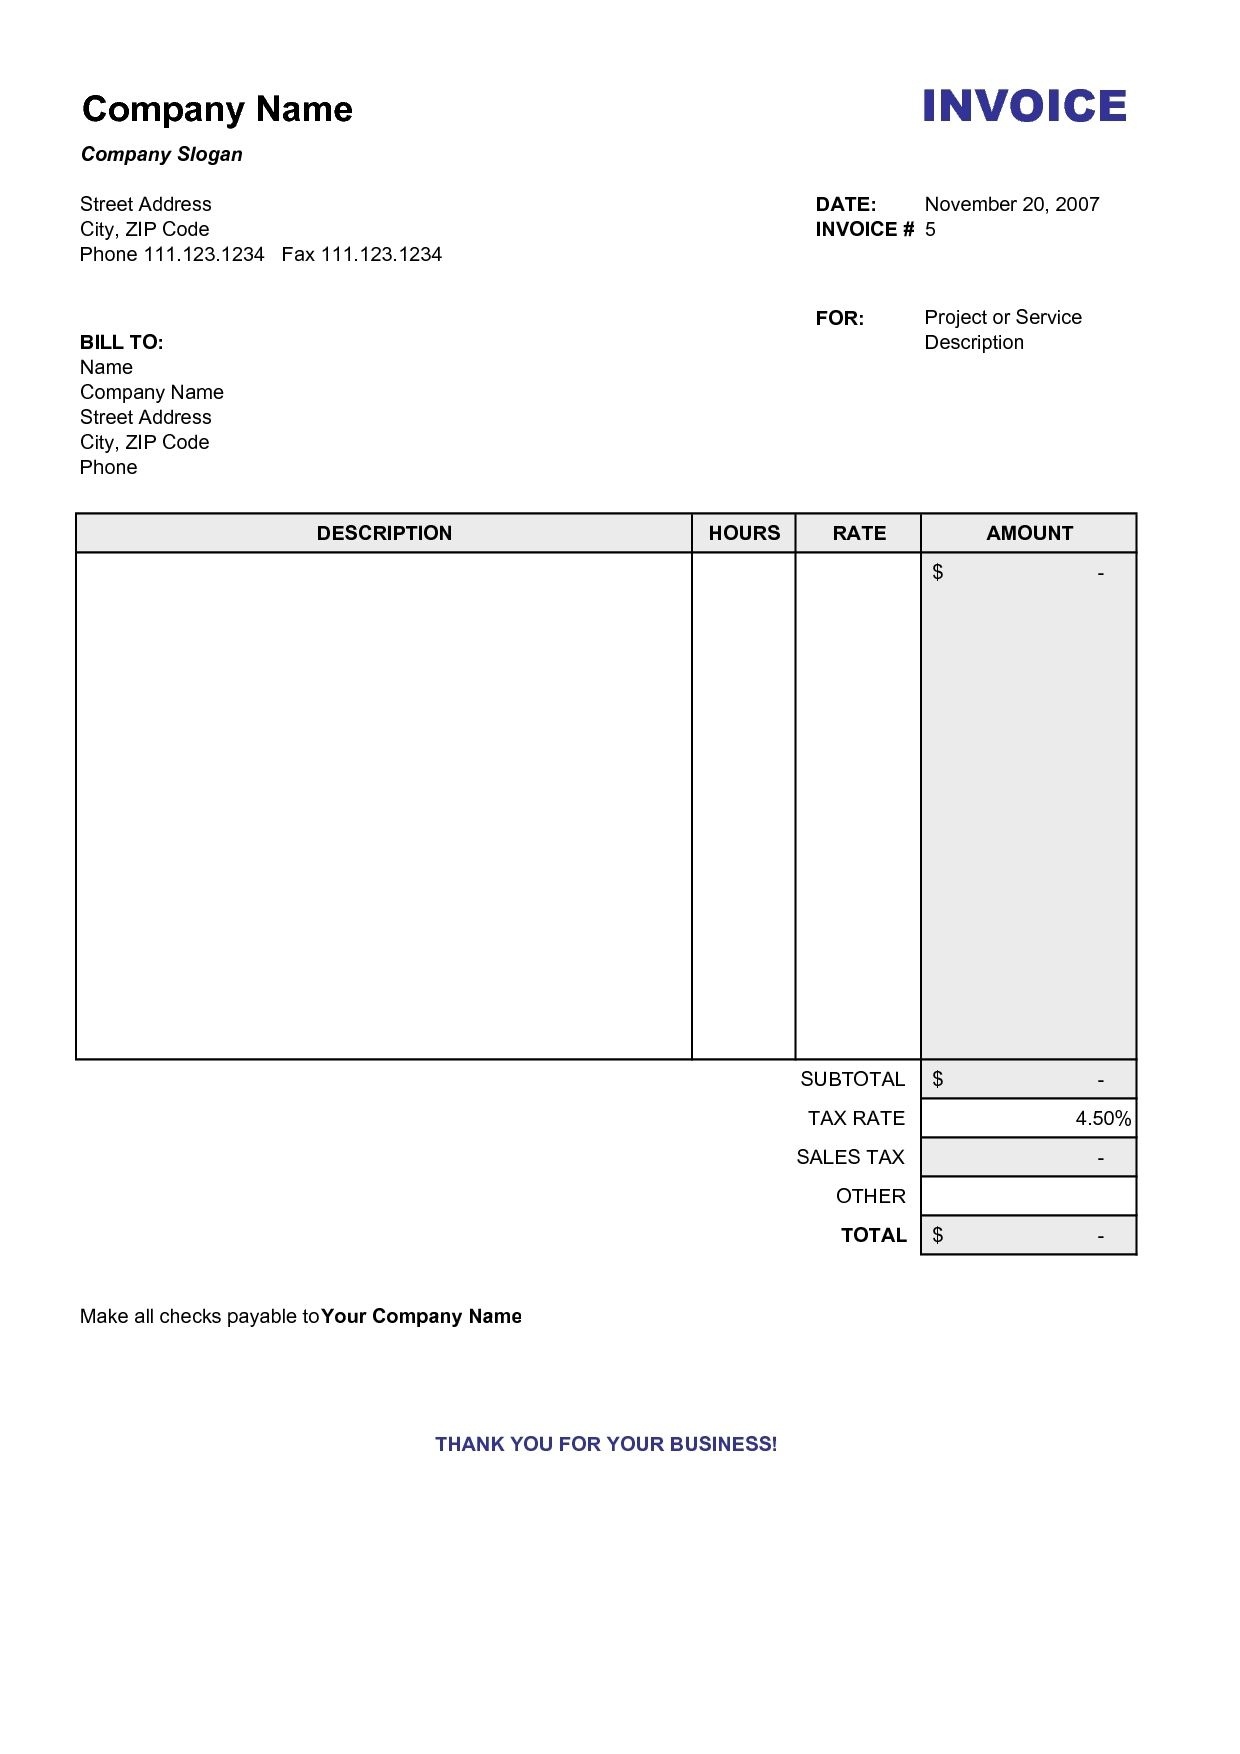 Copy Of A Blank Invoice Invoice Template Free 2016 Copy Of Blank - Free Printable Invoice Templates